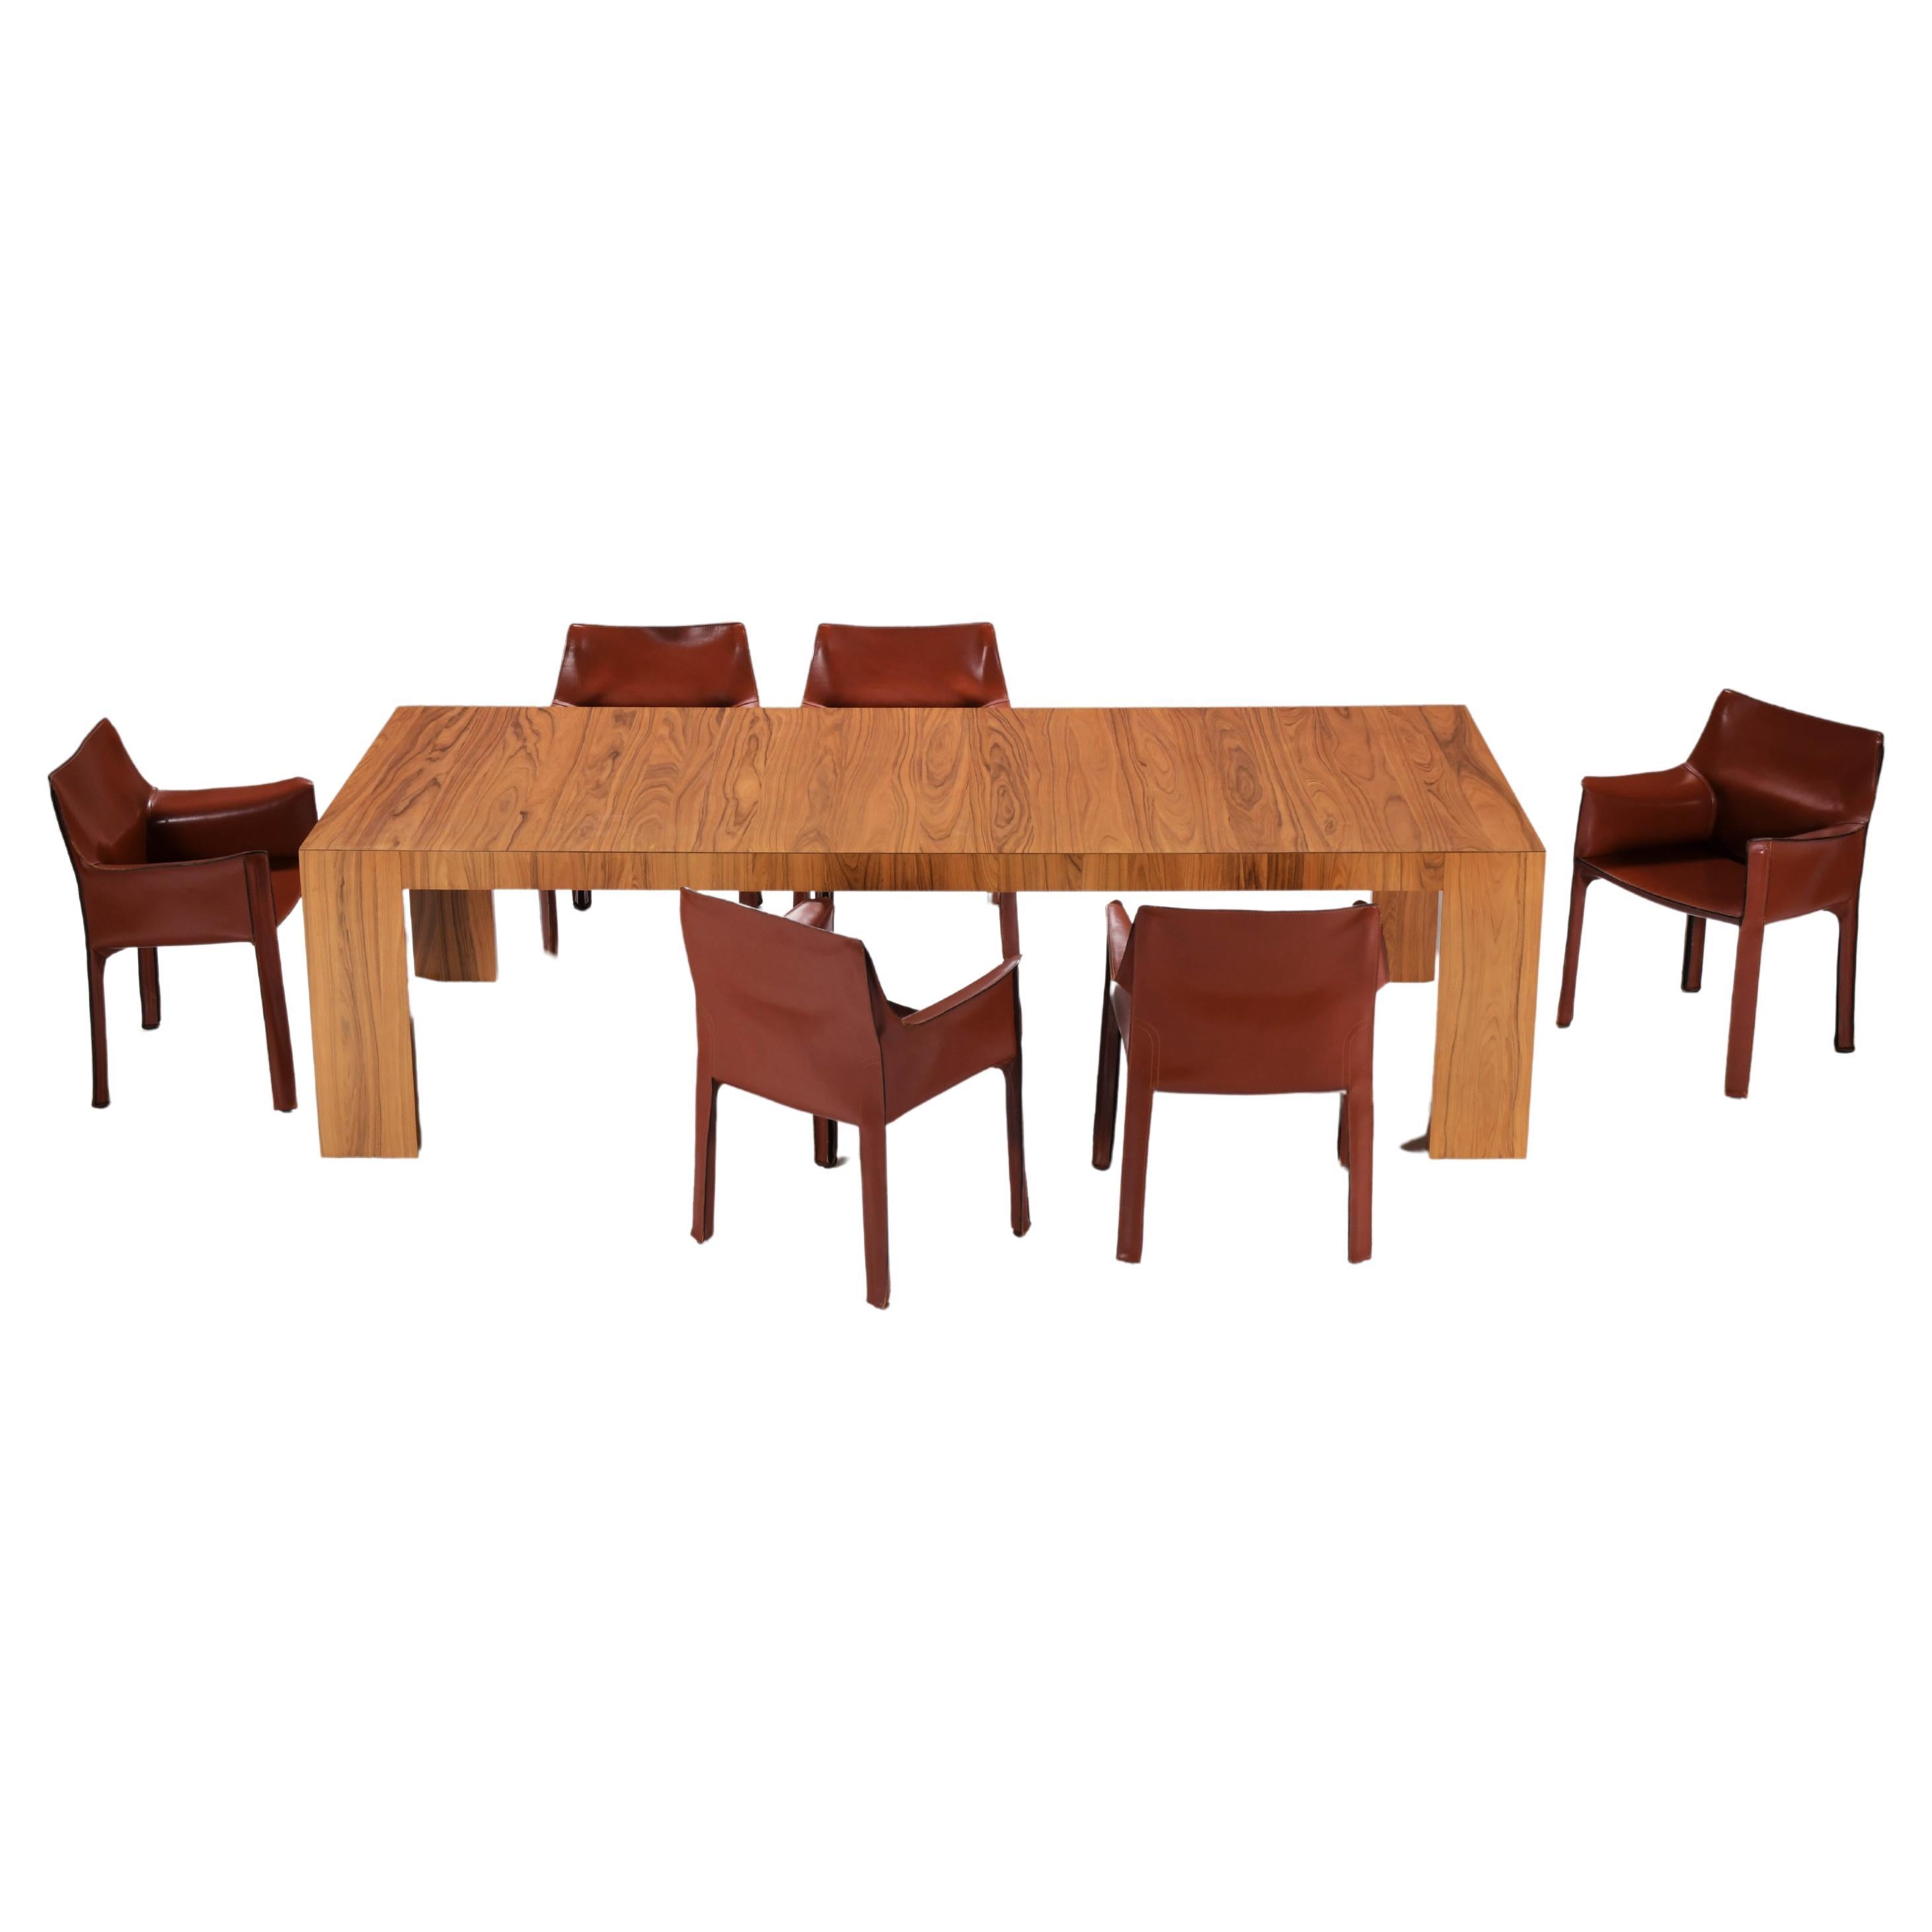 El Dom table + 6 Cab 413 chairs - Hannes Wettstein/Mario Bellini - CASSINA Italy For Sale